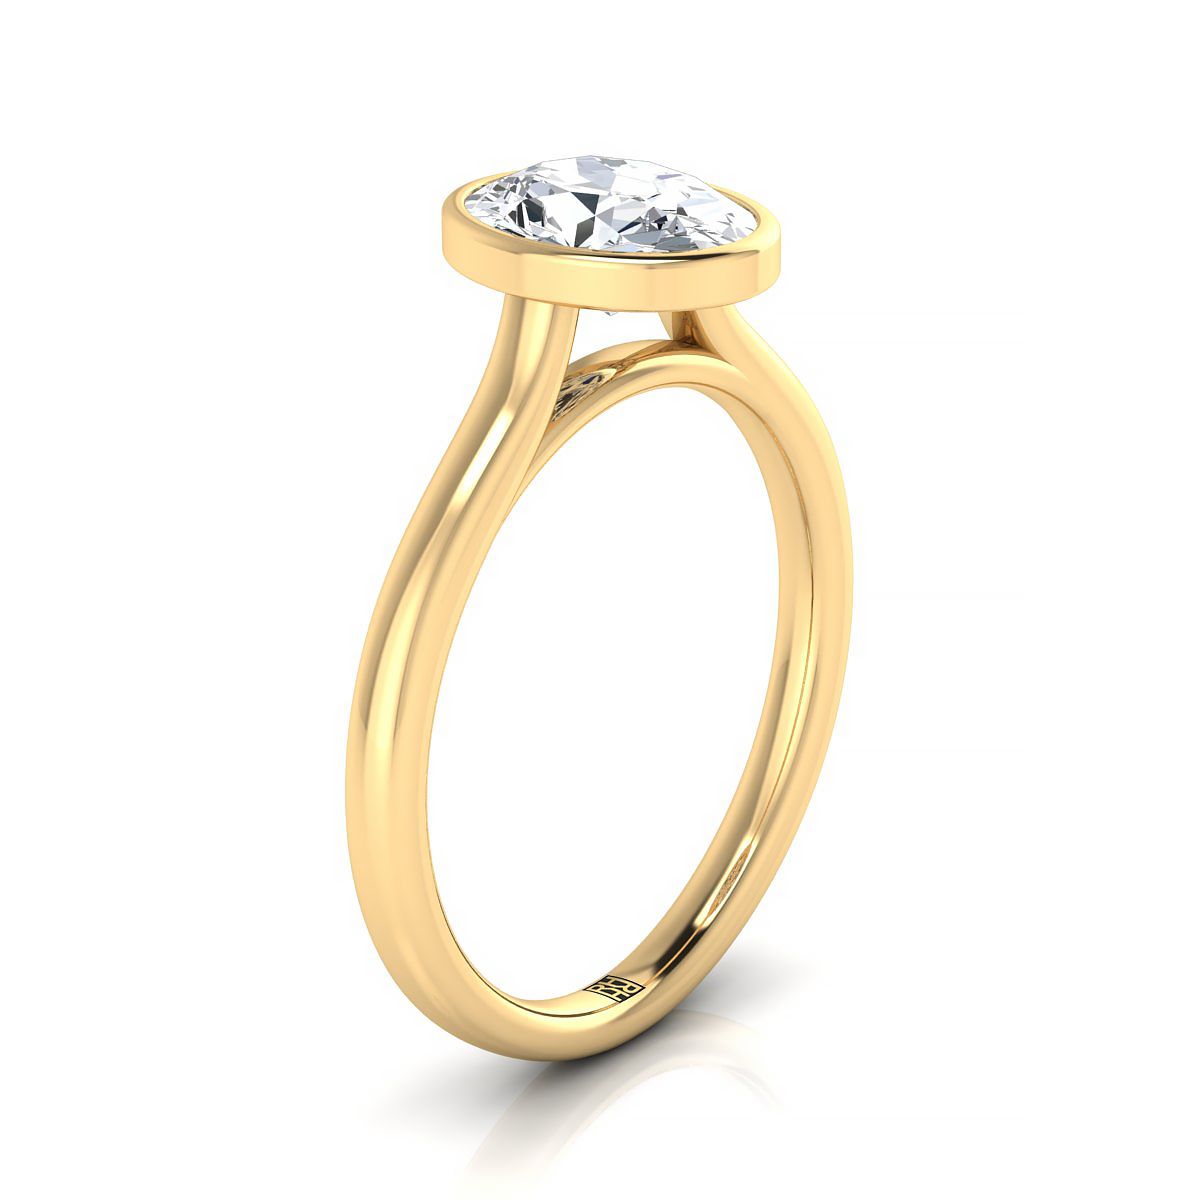 18K Yellow Gold Oval Citrine Simple Bezel Solitaire Engagement Ring